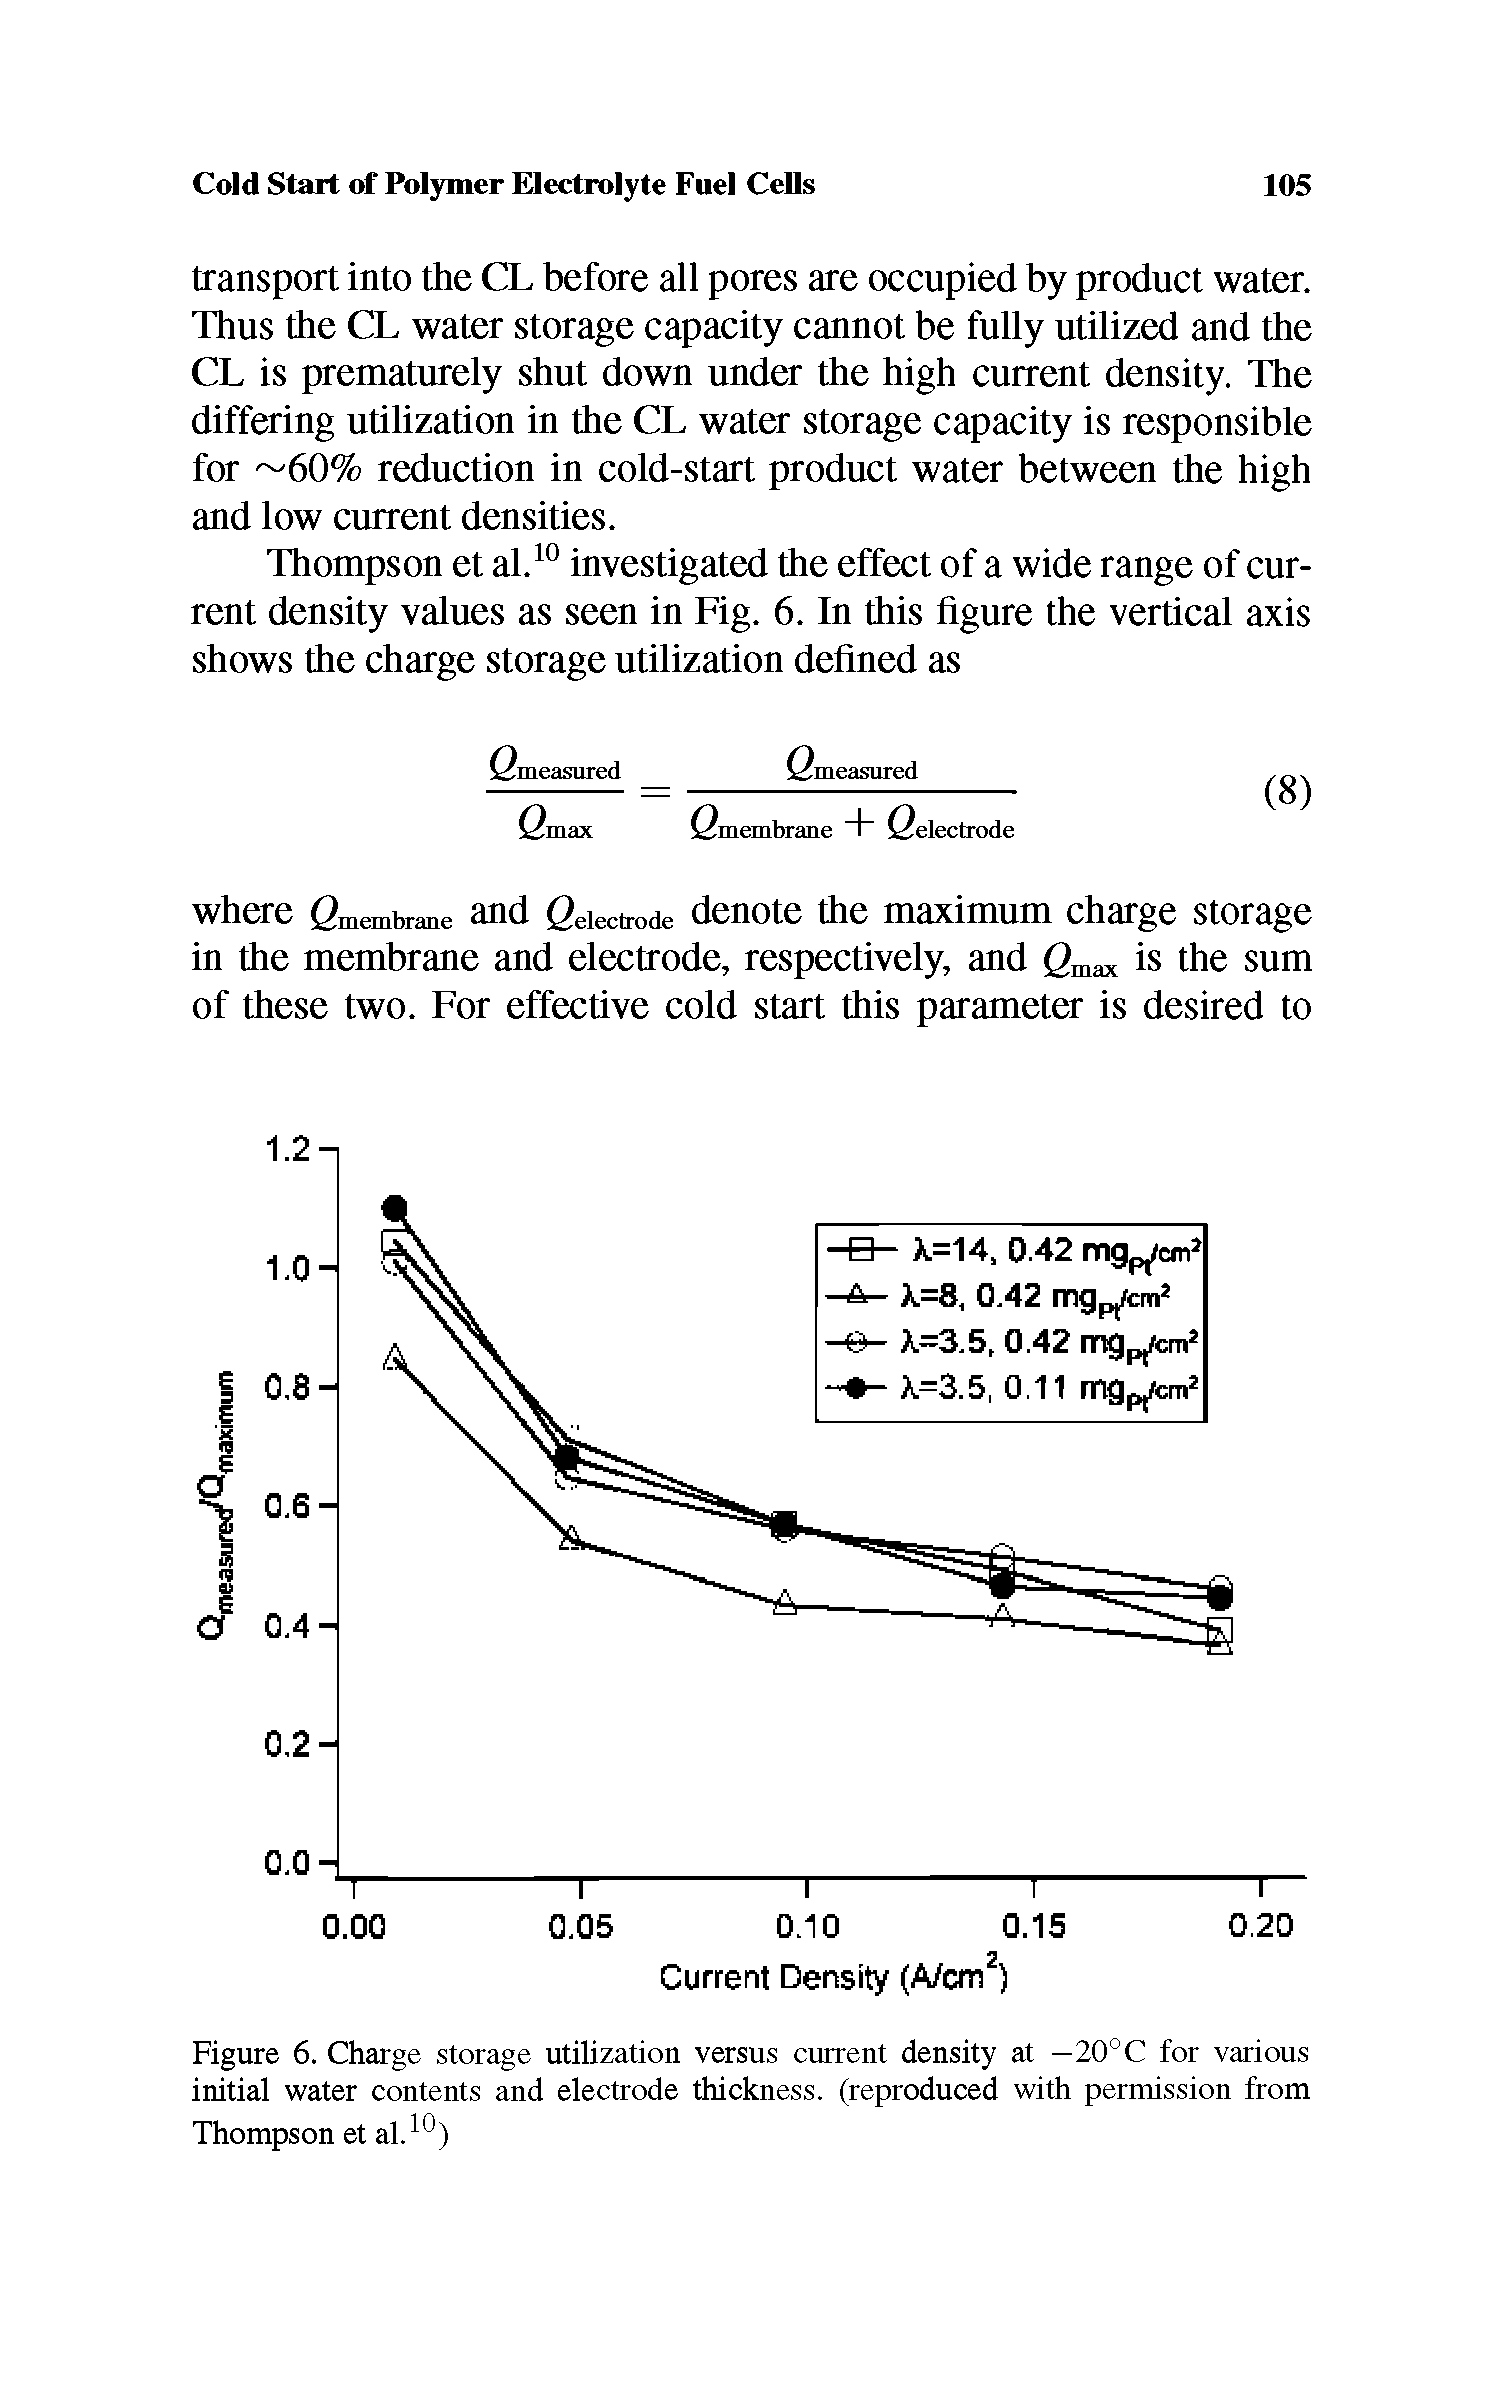 Figure 6. Charge storage utilization versus current density at —20°C for various initial water contents and electrode thickness, (reproduced with permission from Thompson et al.10)...